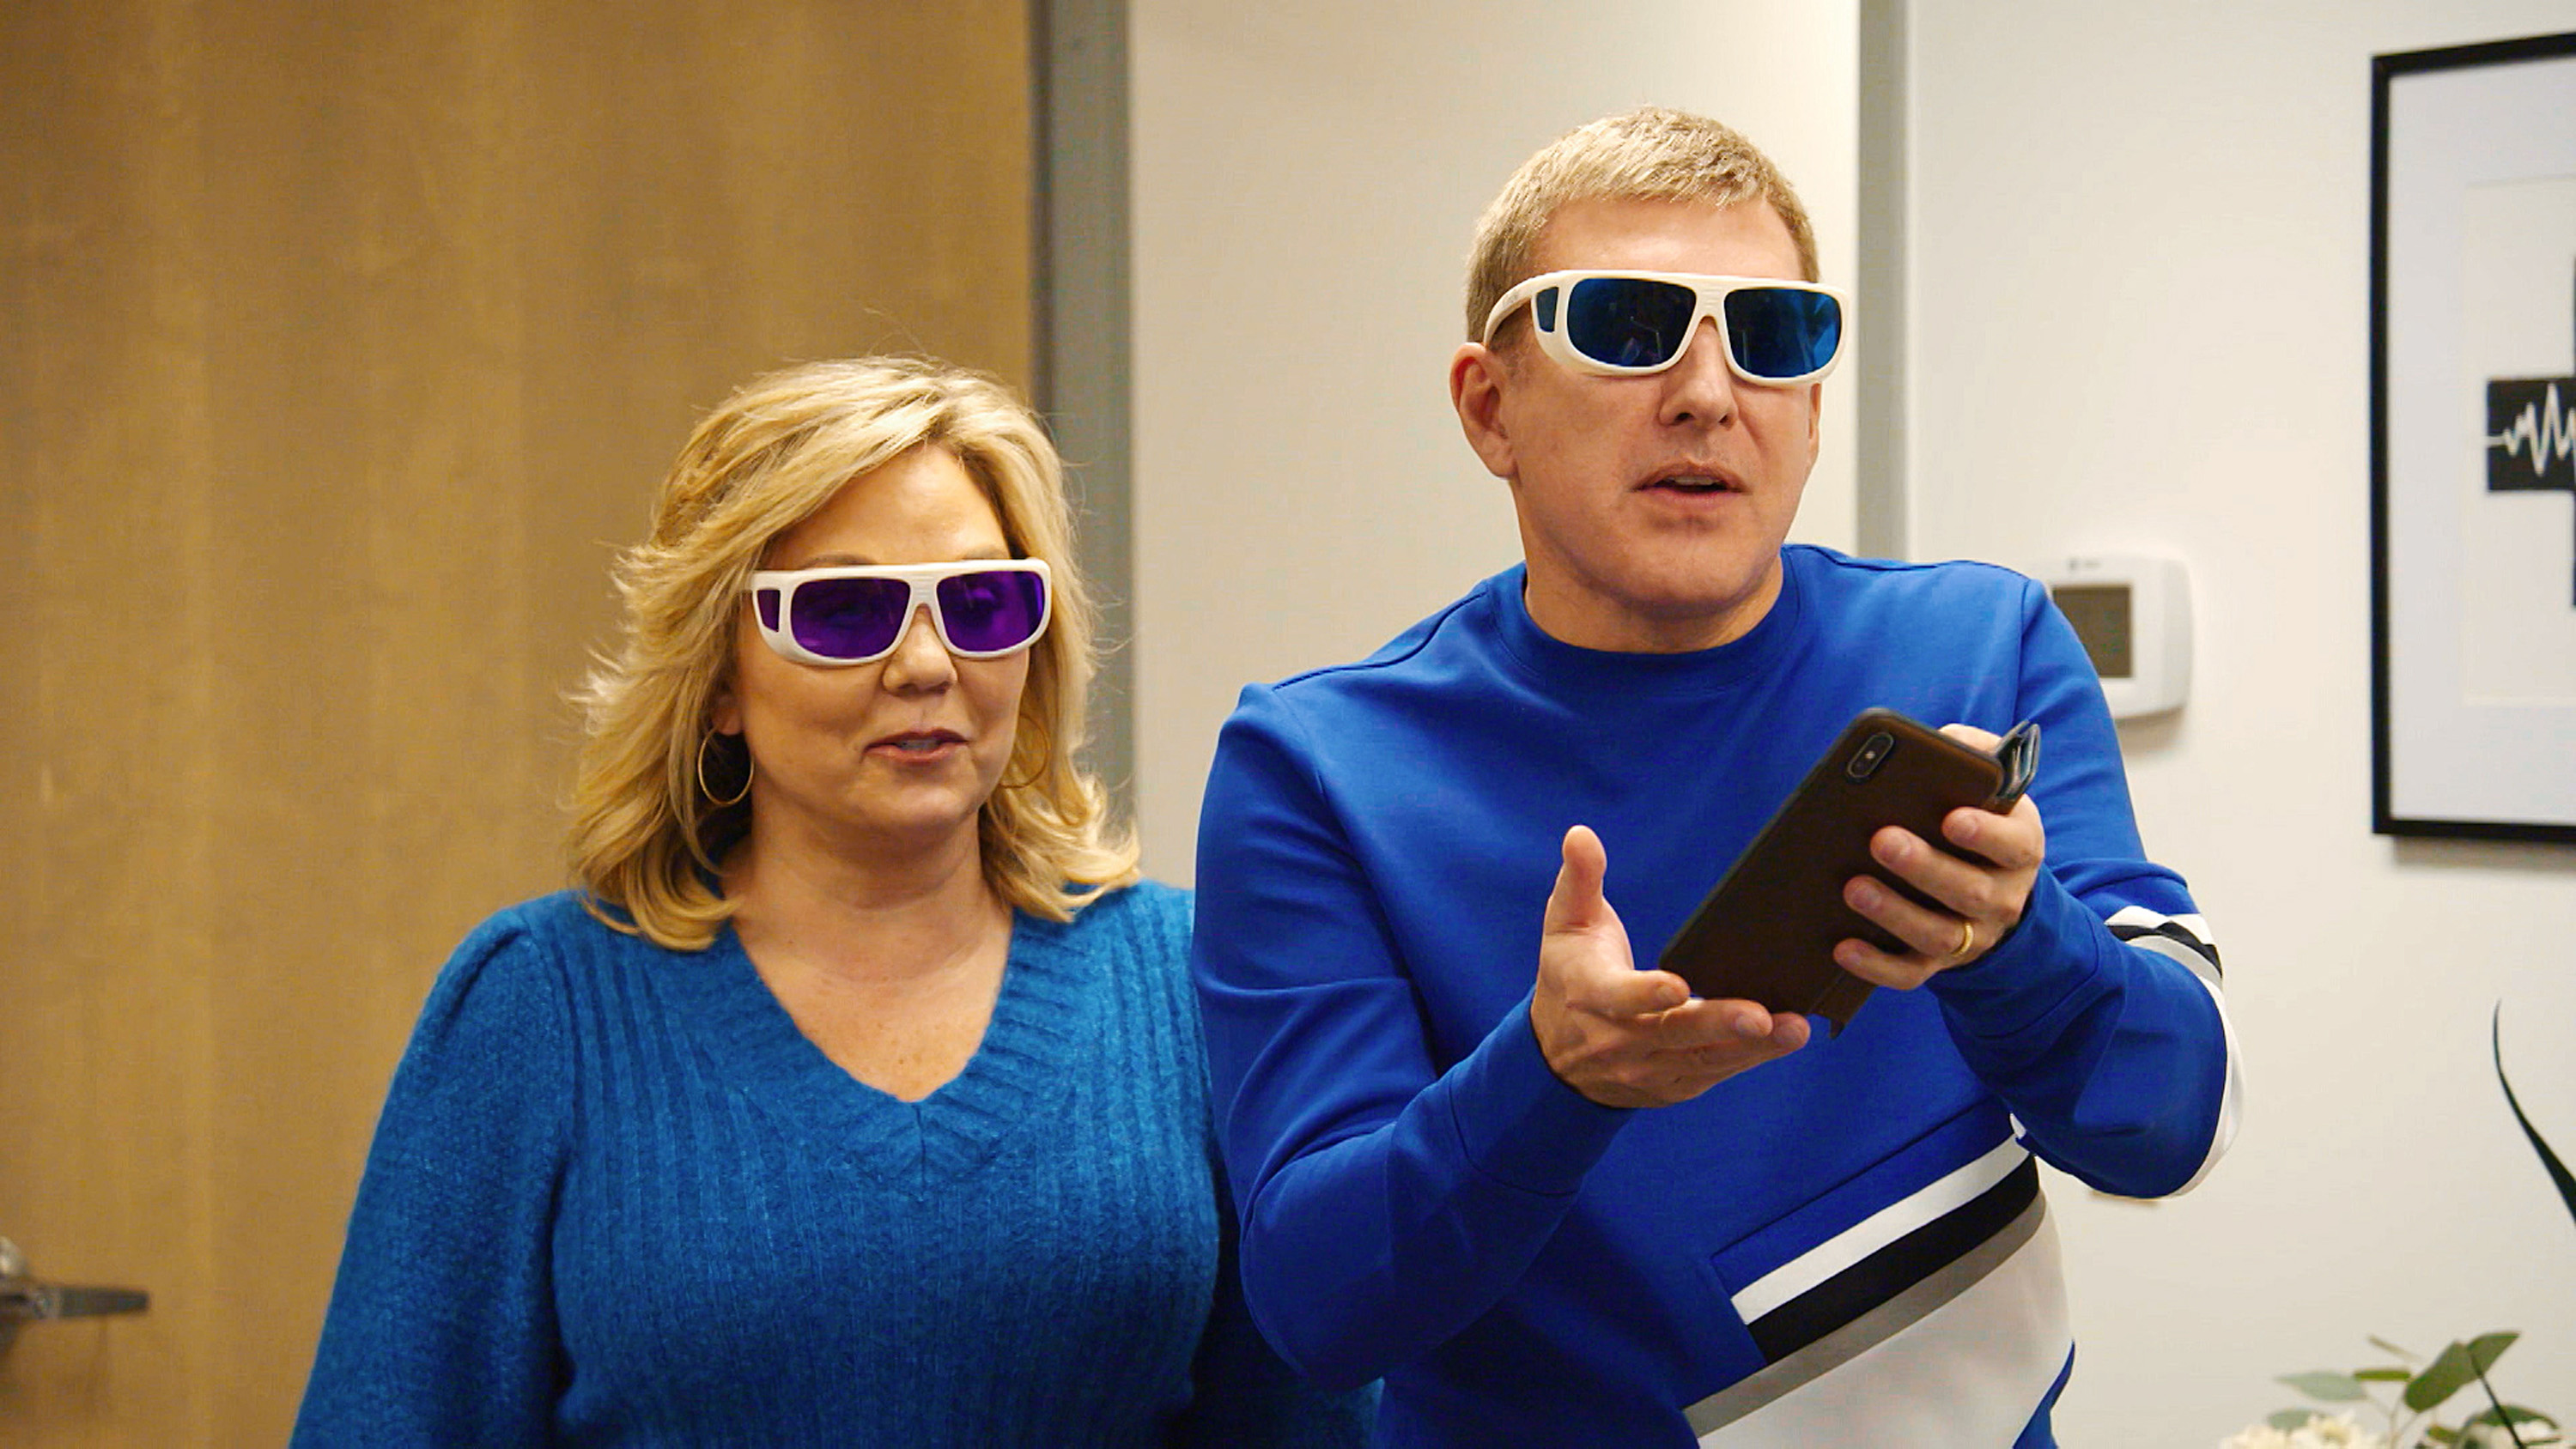 Julie and Todd Chrisley in blue tops and wearing sunglasses on 'Chrisley Knows Best'